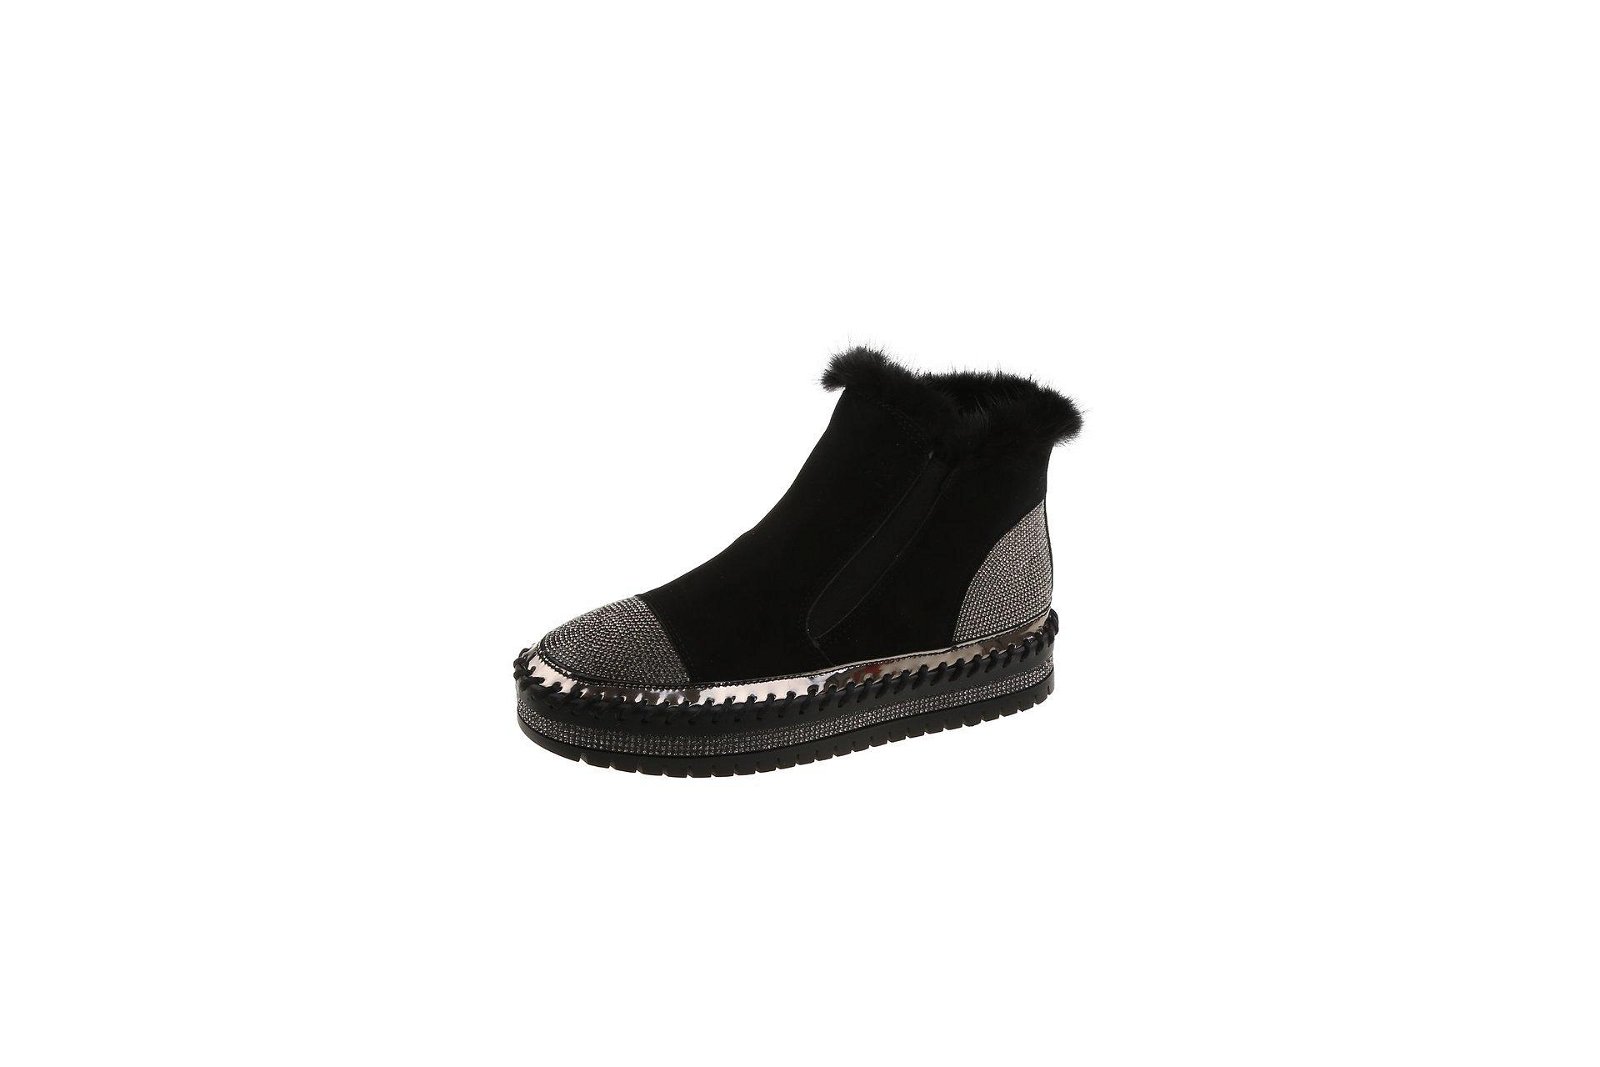 Knitting Style Handmade Women Boots With Fur Collar